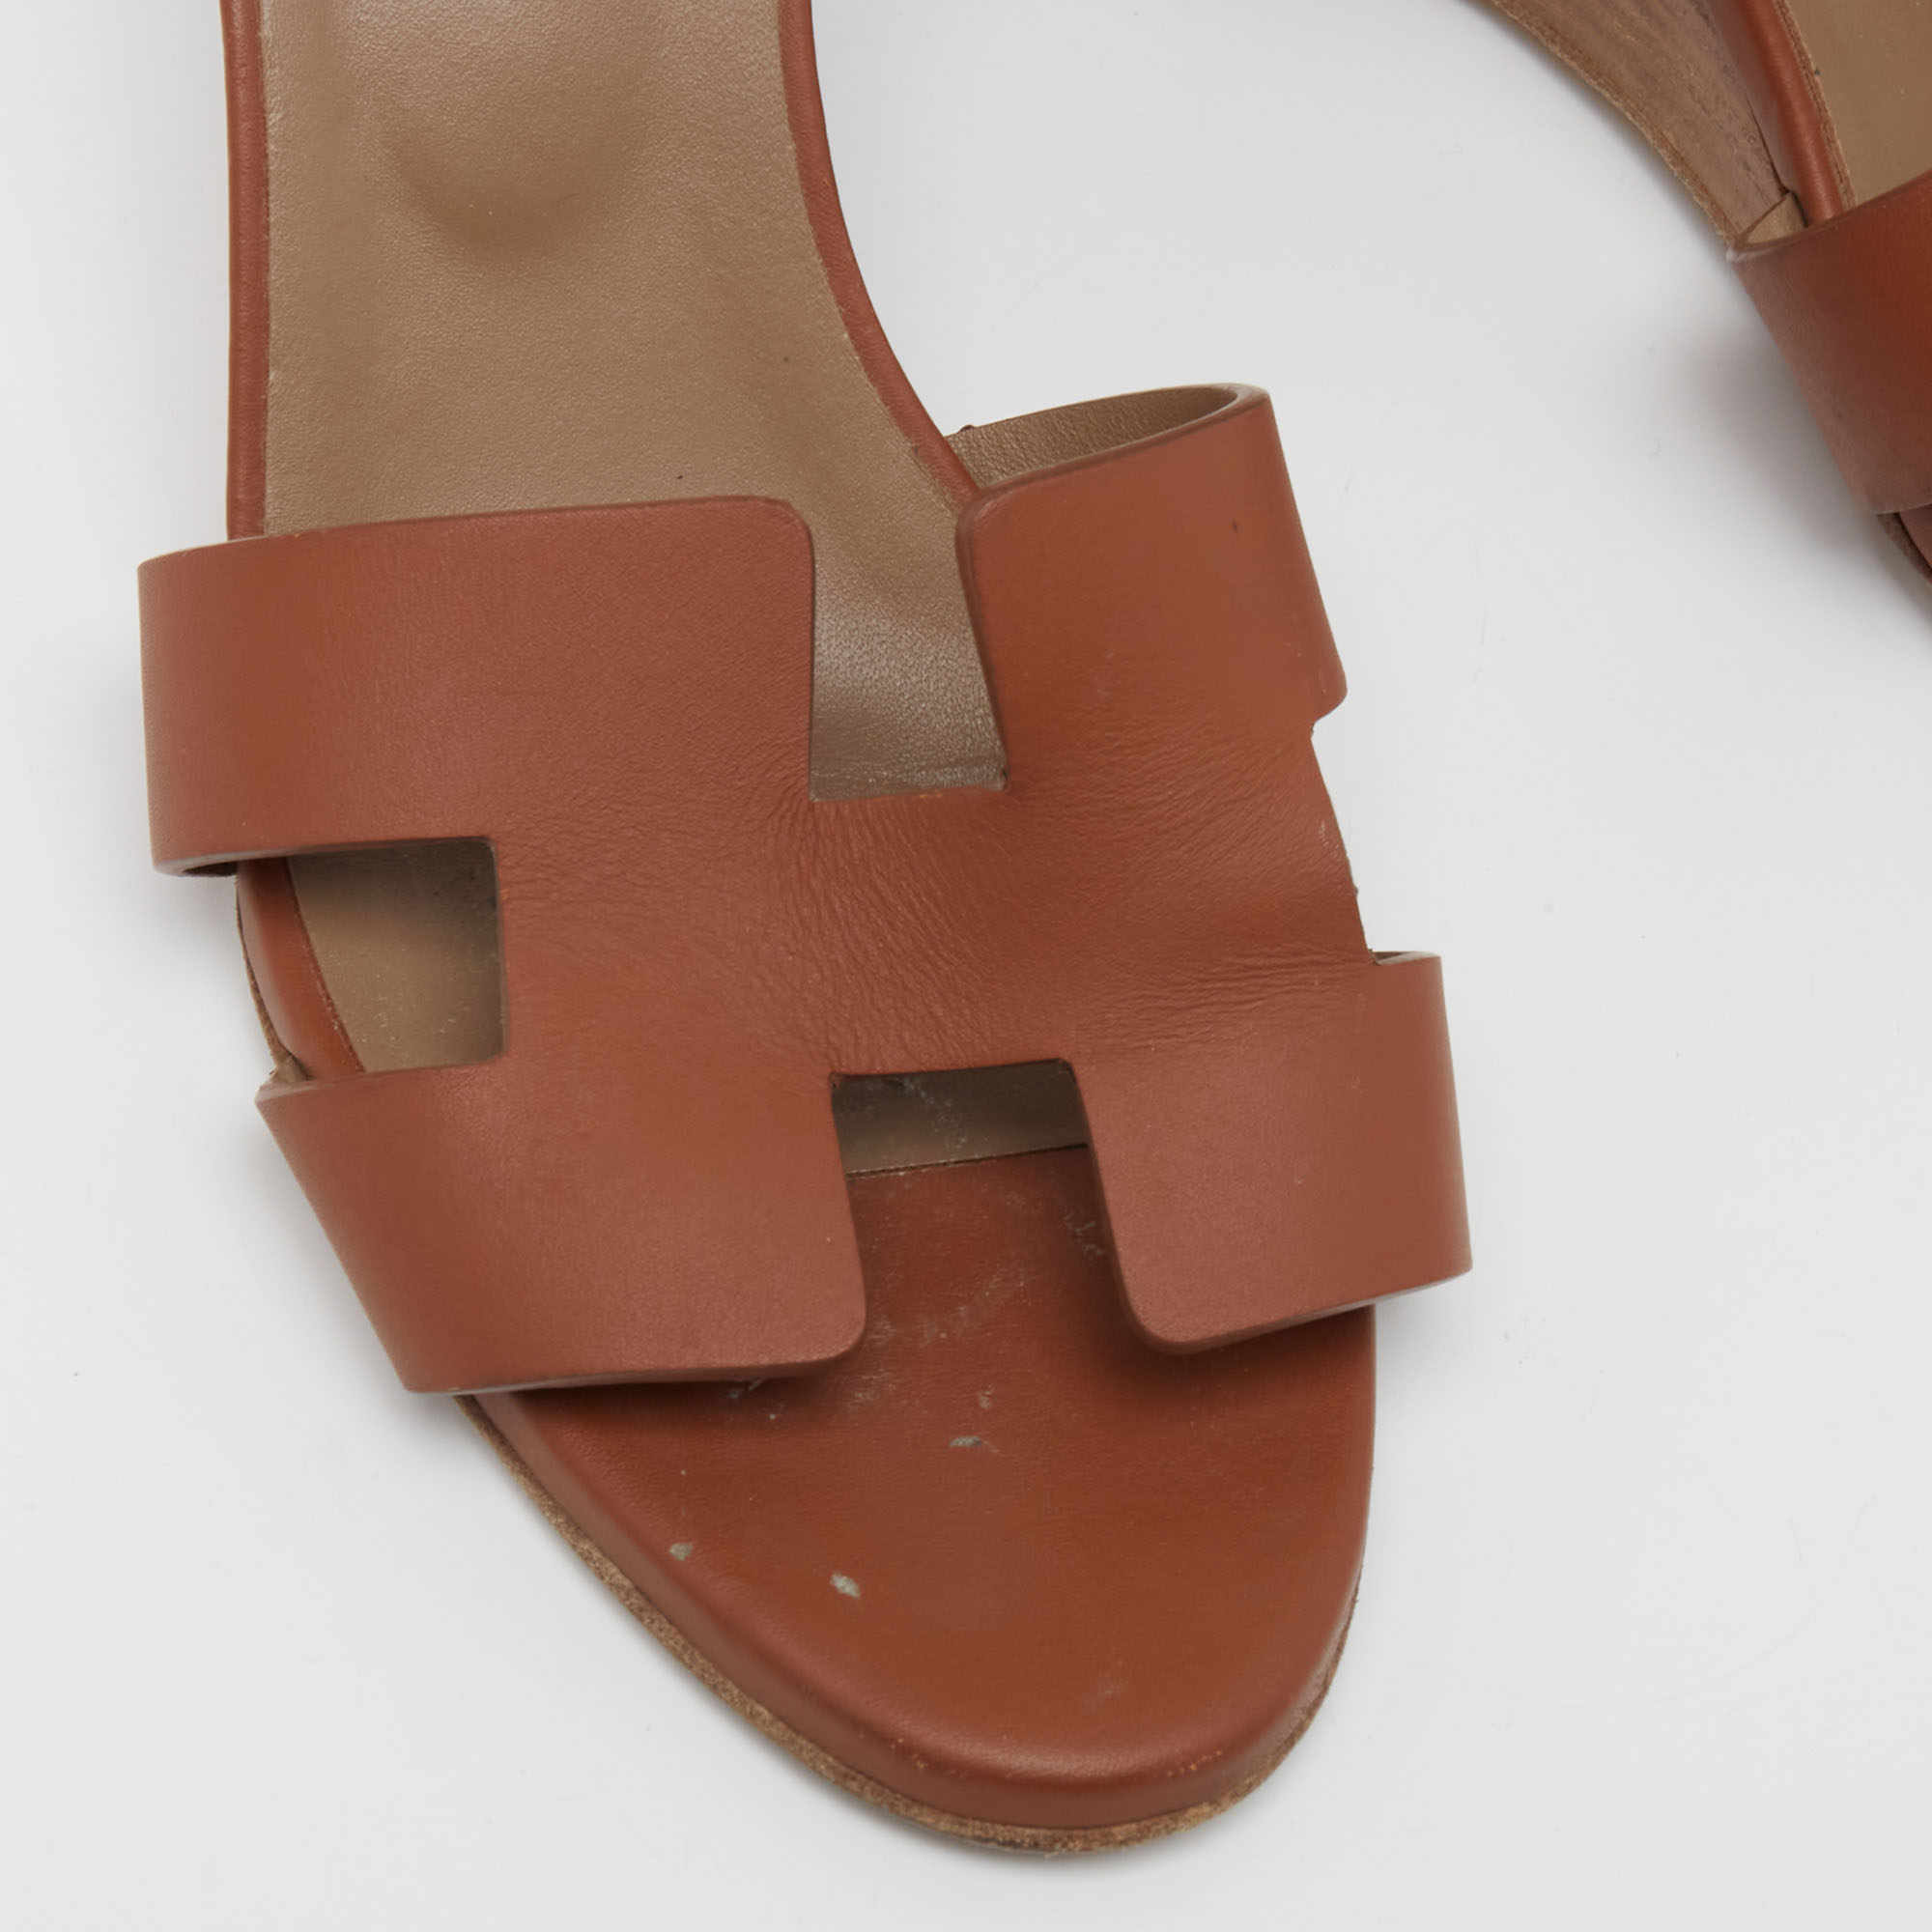 Hermes Brown Leather Legend Wedge Ankle Strap Sandals Size 38.5